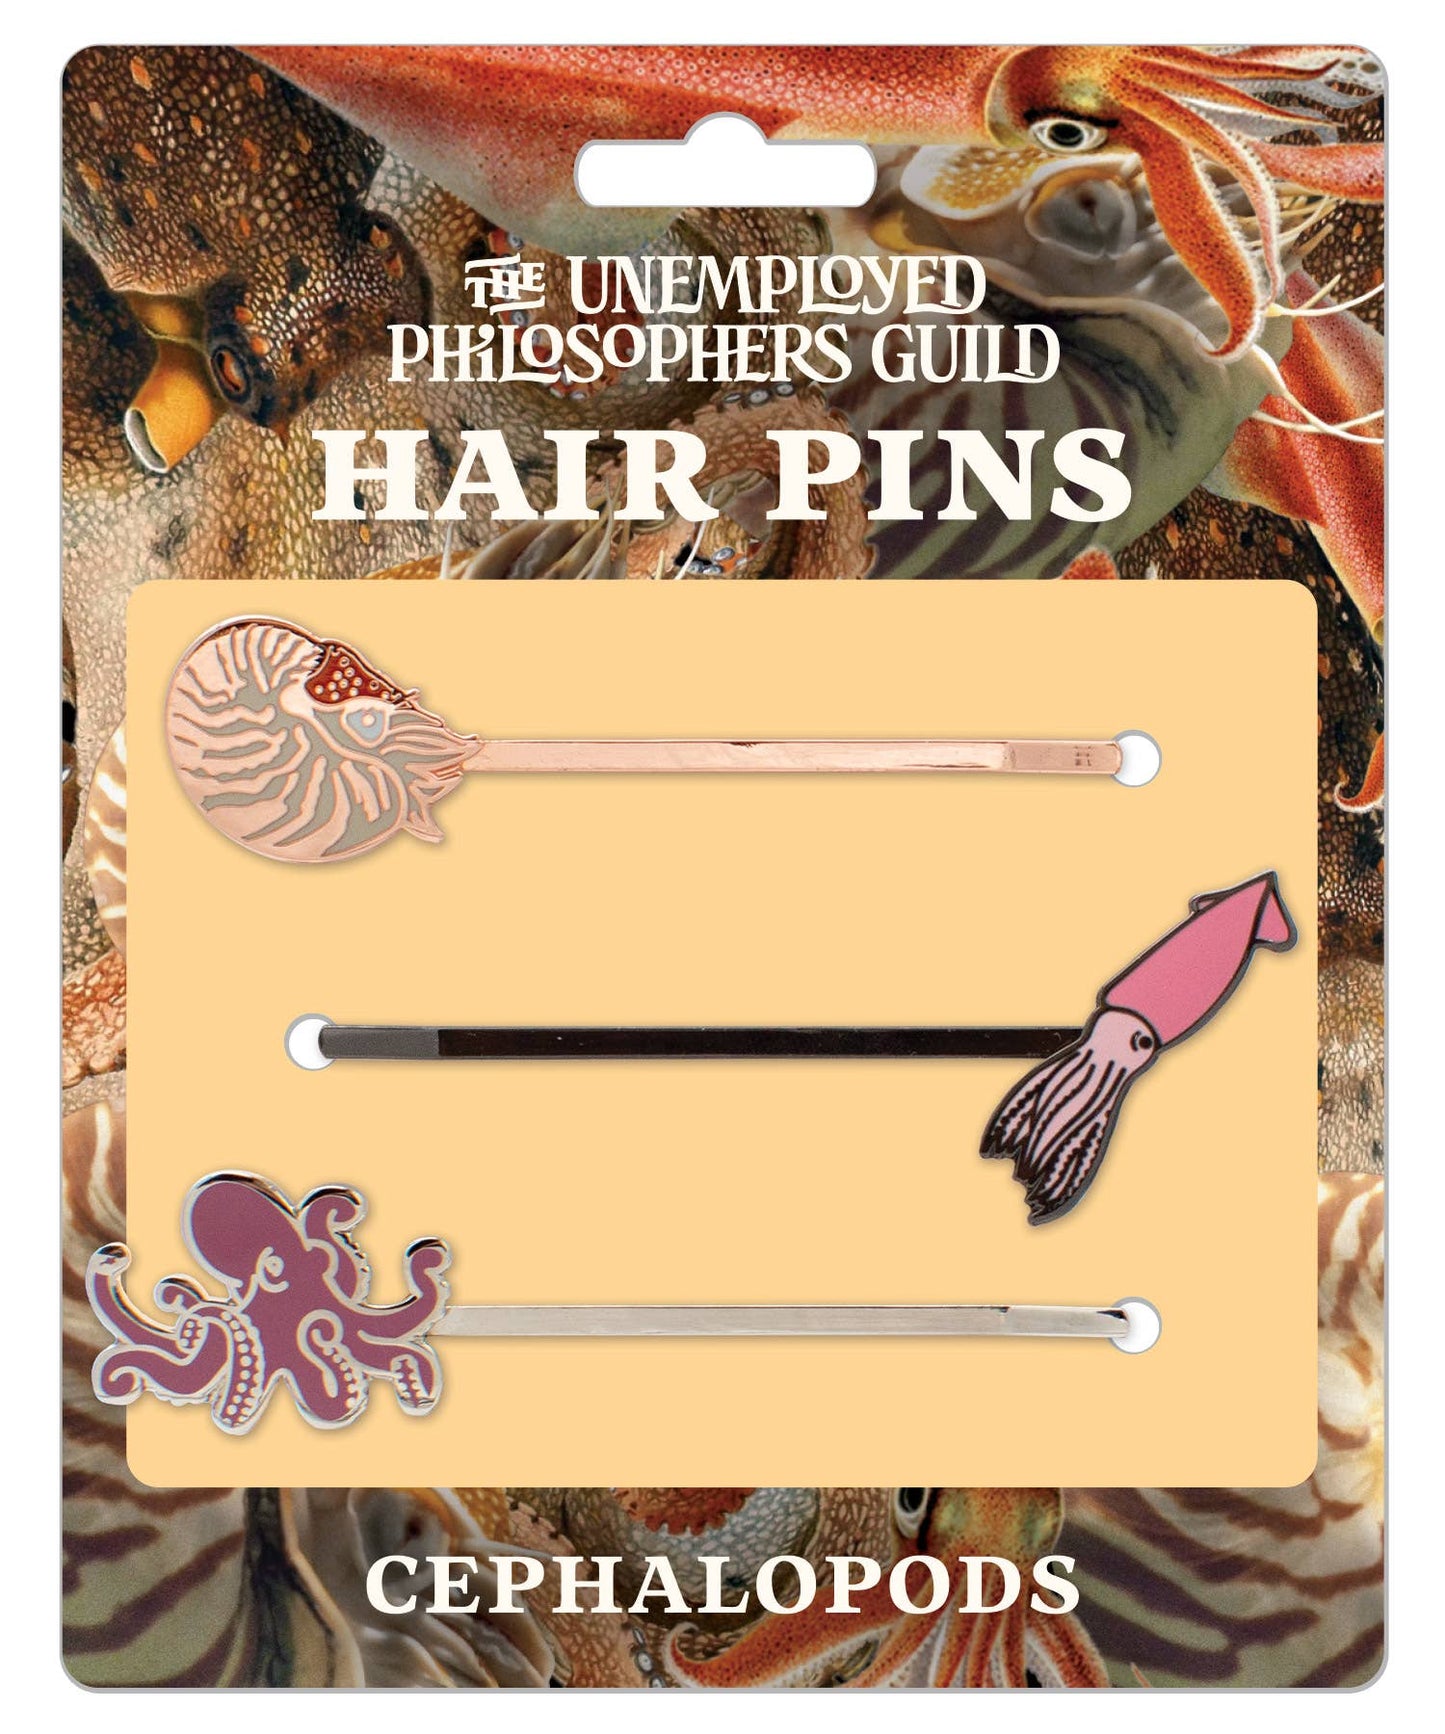 Cephalopods Hair Pins from Unemployed Philosophers Guild